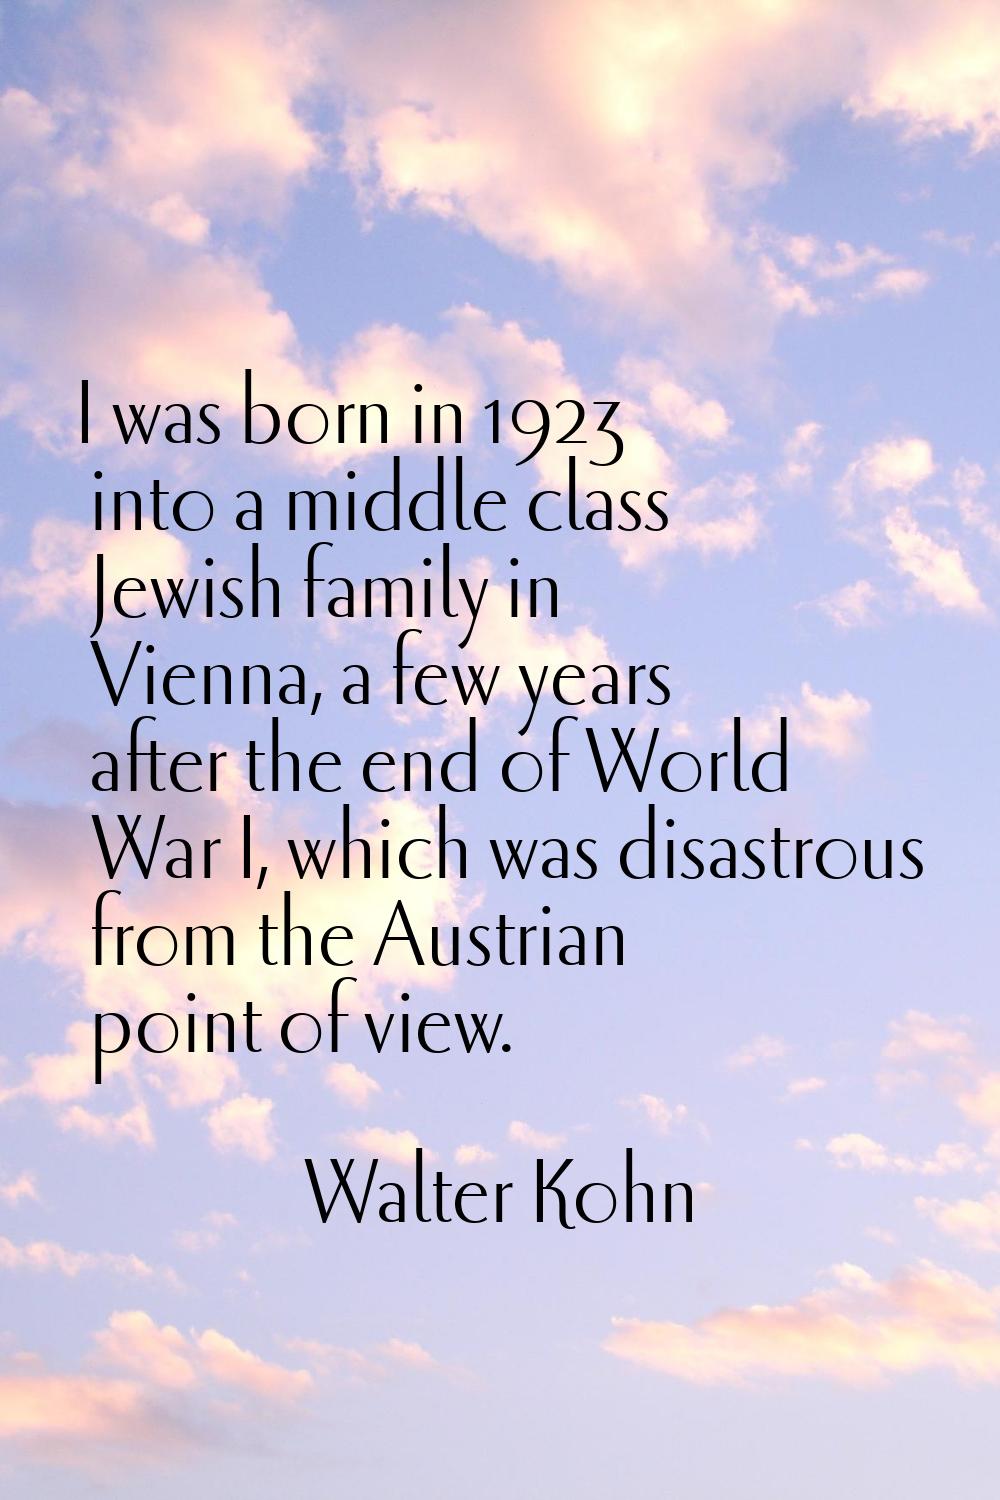 I was born in 1923 into a middle class Jewish family in Vienna, a few years after the end of World 